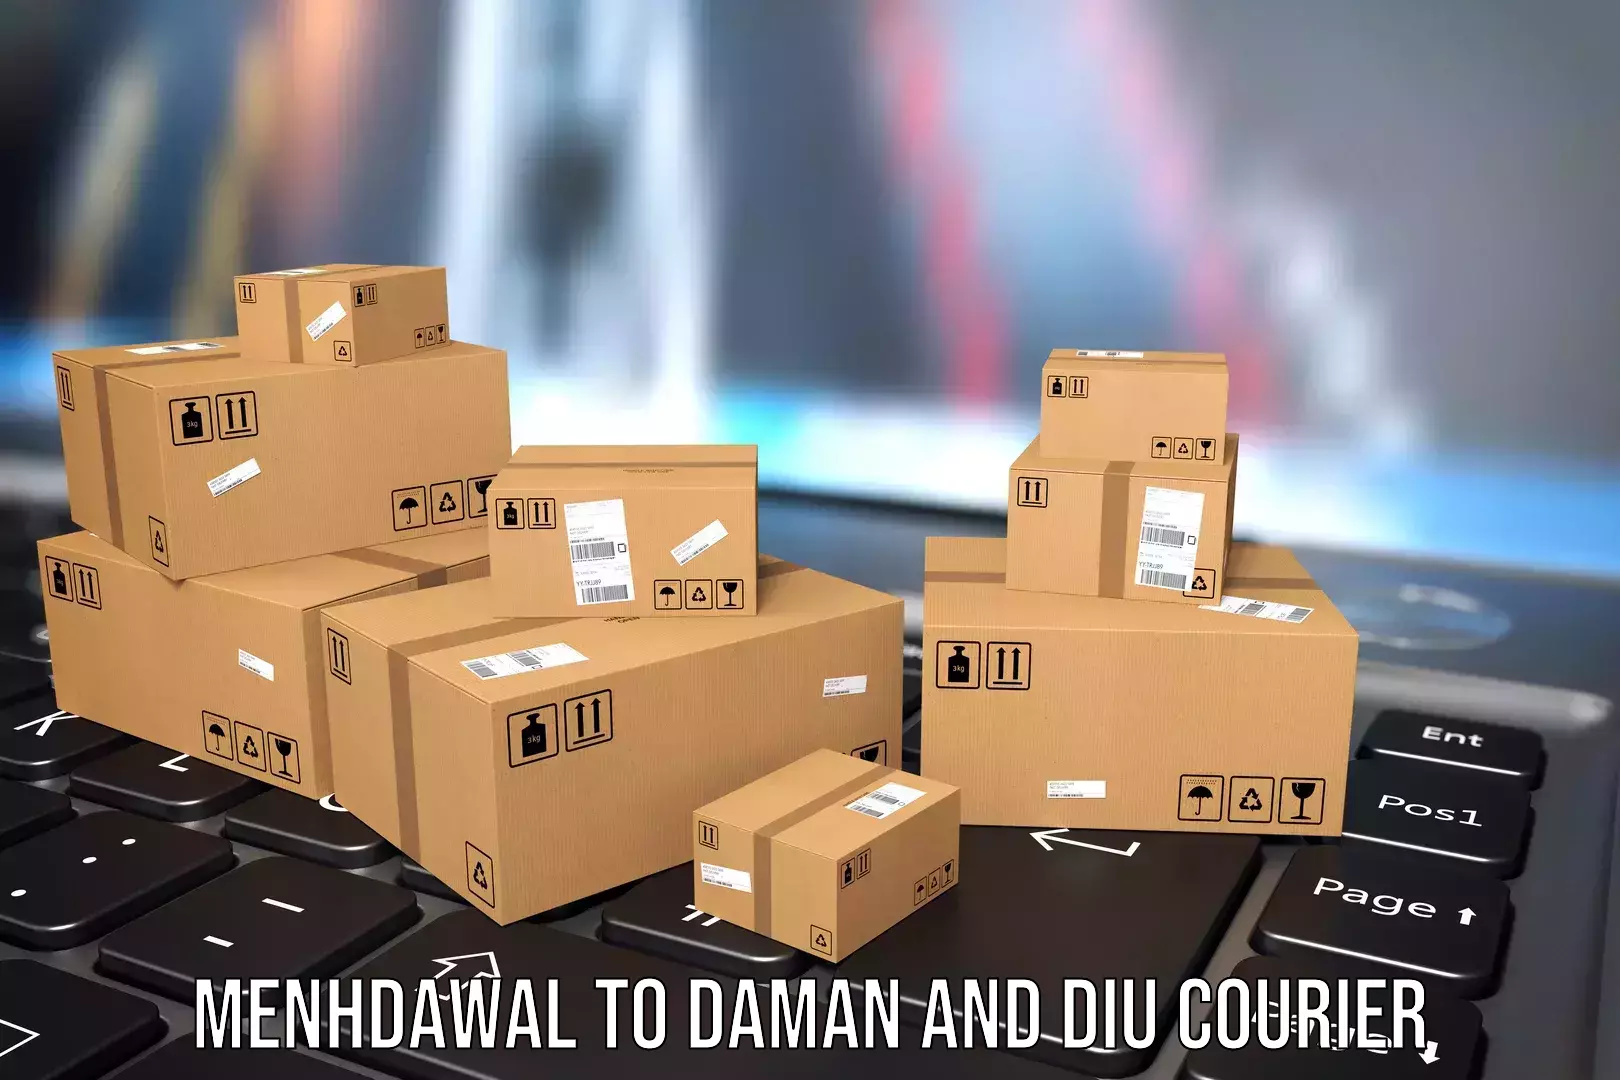 Luggage shipment specialists Menhdawal to Daman and Diu